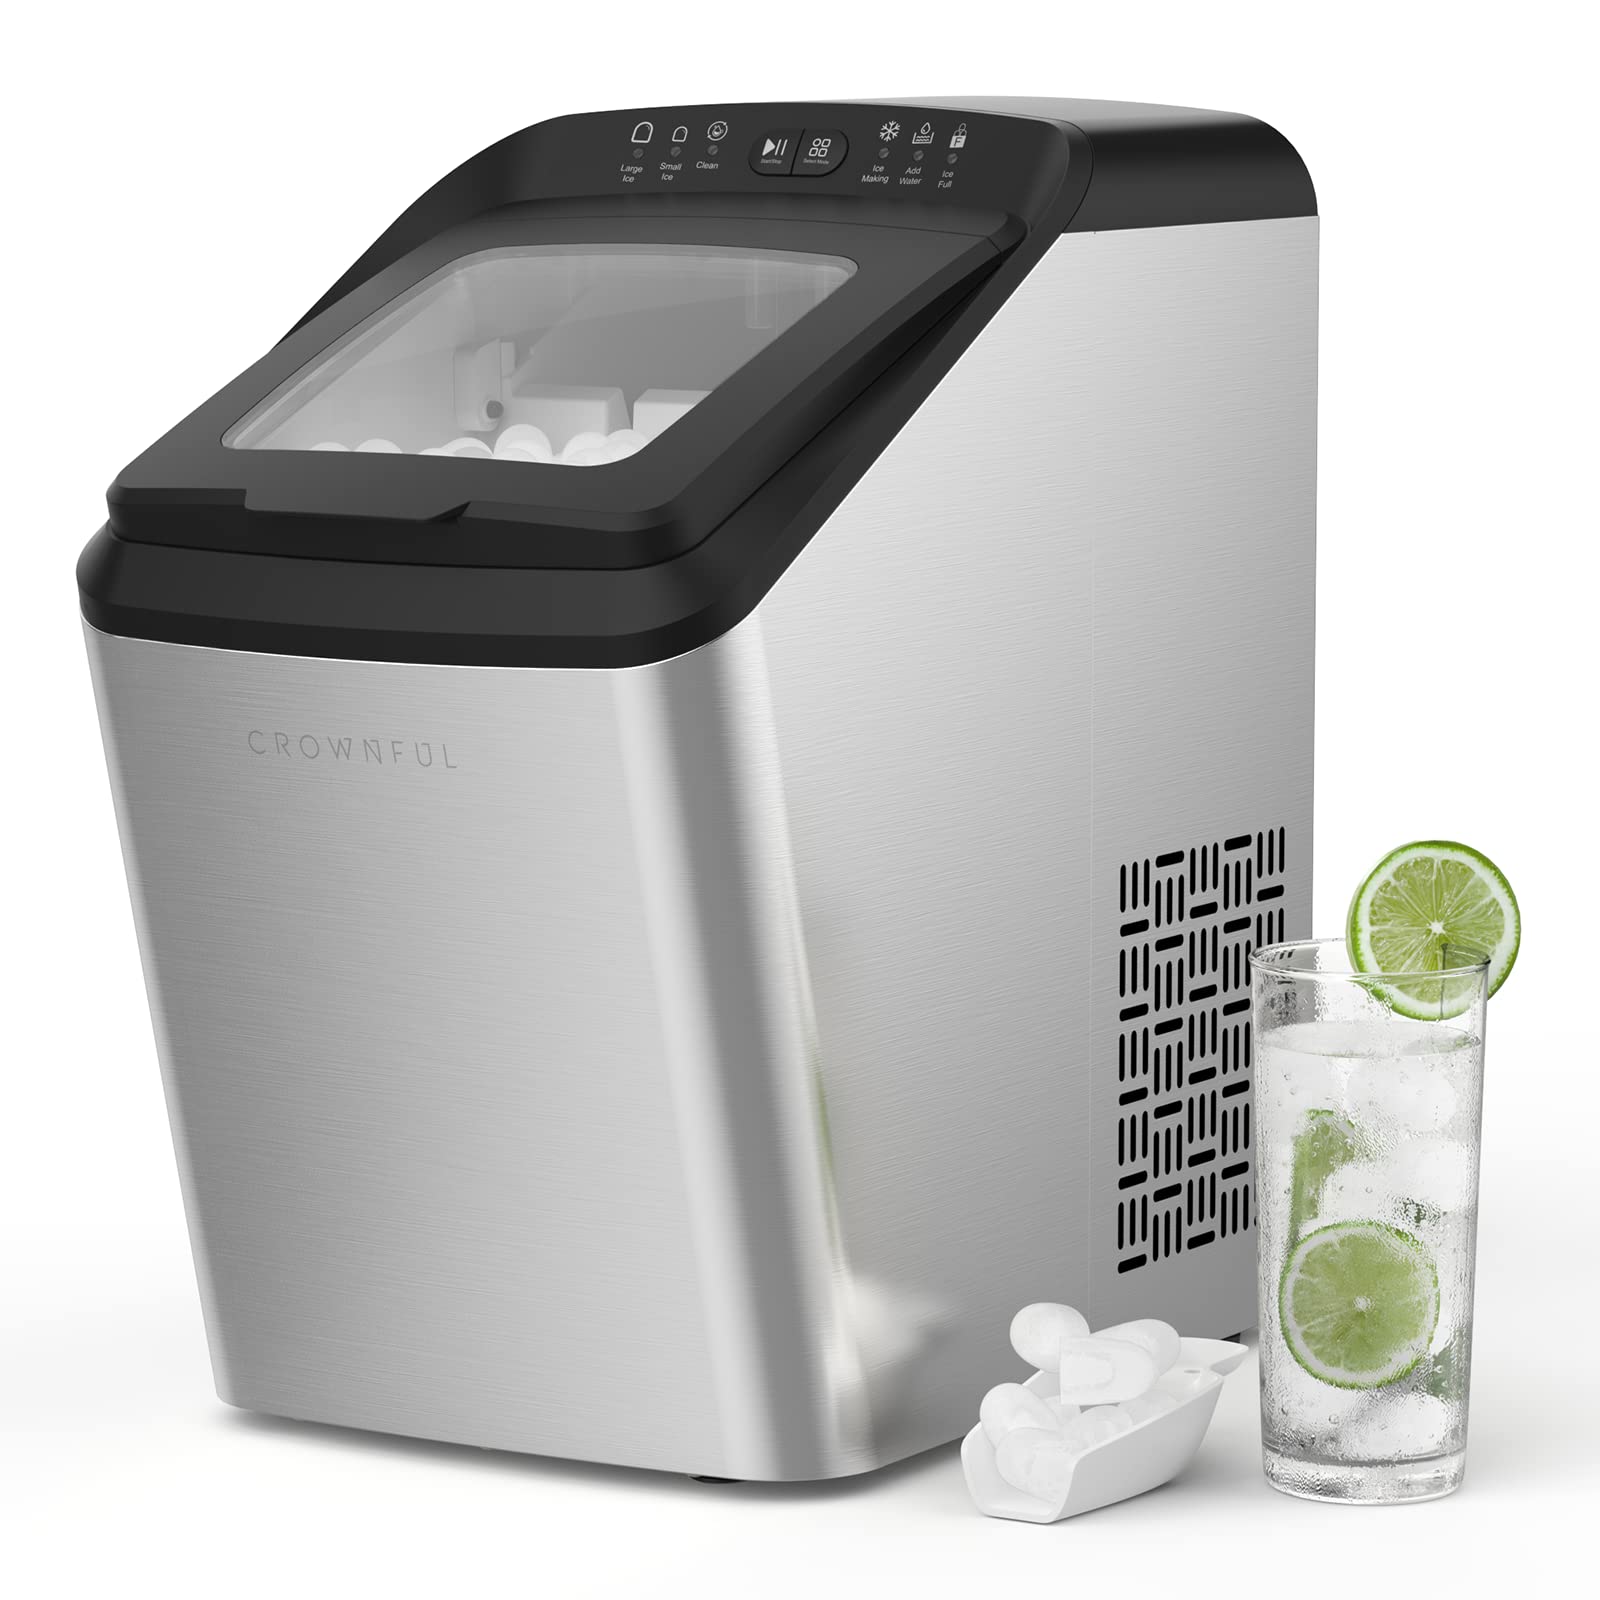 CROWNFUL Bullet Ice Maker Countertop, Portable Ice Machine, 9 Bullet Ice Cubes Ready in 7-10 Mins, 33 lbs Ice Cubes in 24H, 2 Size (S/L) Crunchy Ice, Automatic Self-Cleaning, with Ice Scoop and Basket